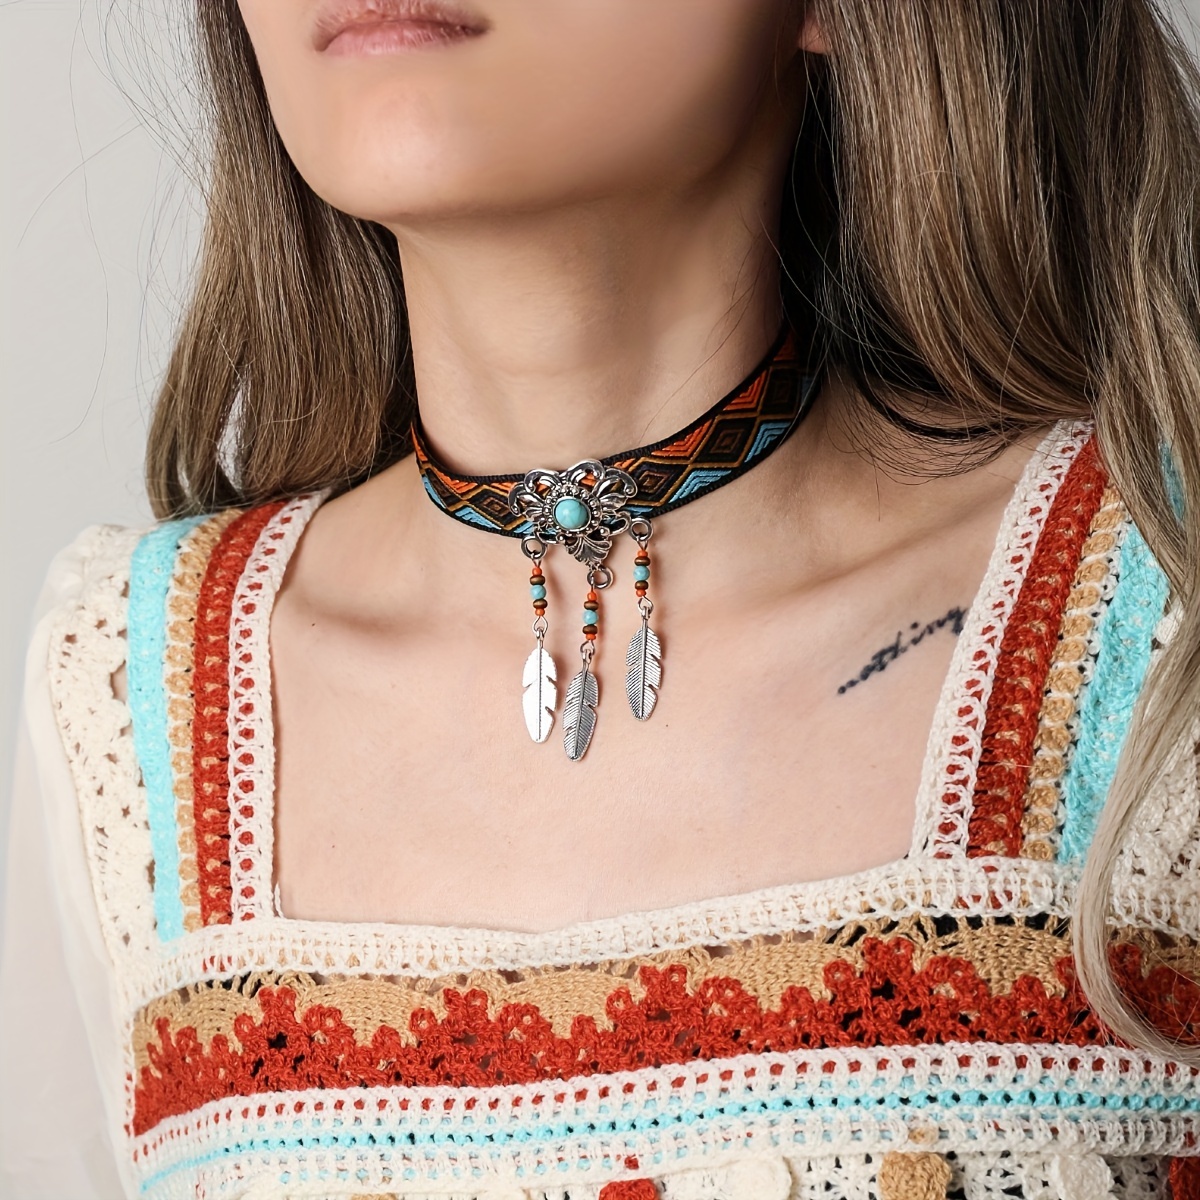 

Bohemian Ethnic Faux Turquoise Choker Necklace With Totem Elements, Multicolored Fabric And Silver Plated Feathers, Women's Fashionable Jewelry Accessory, Adjustable Size